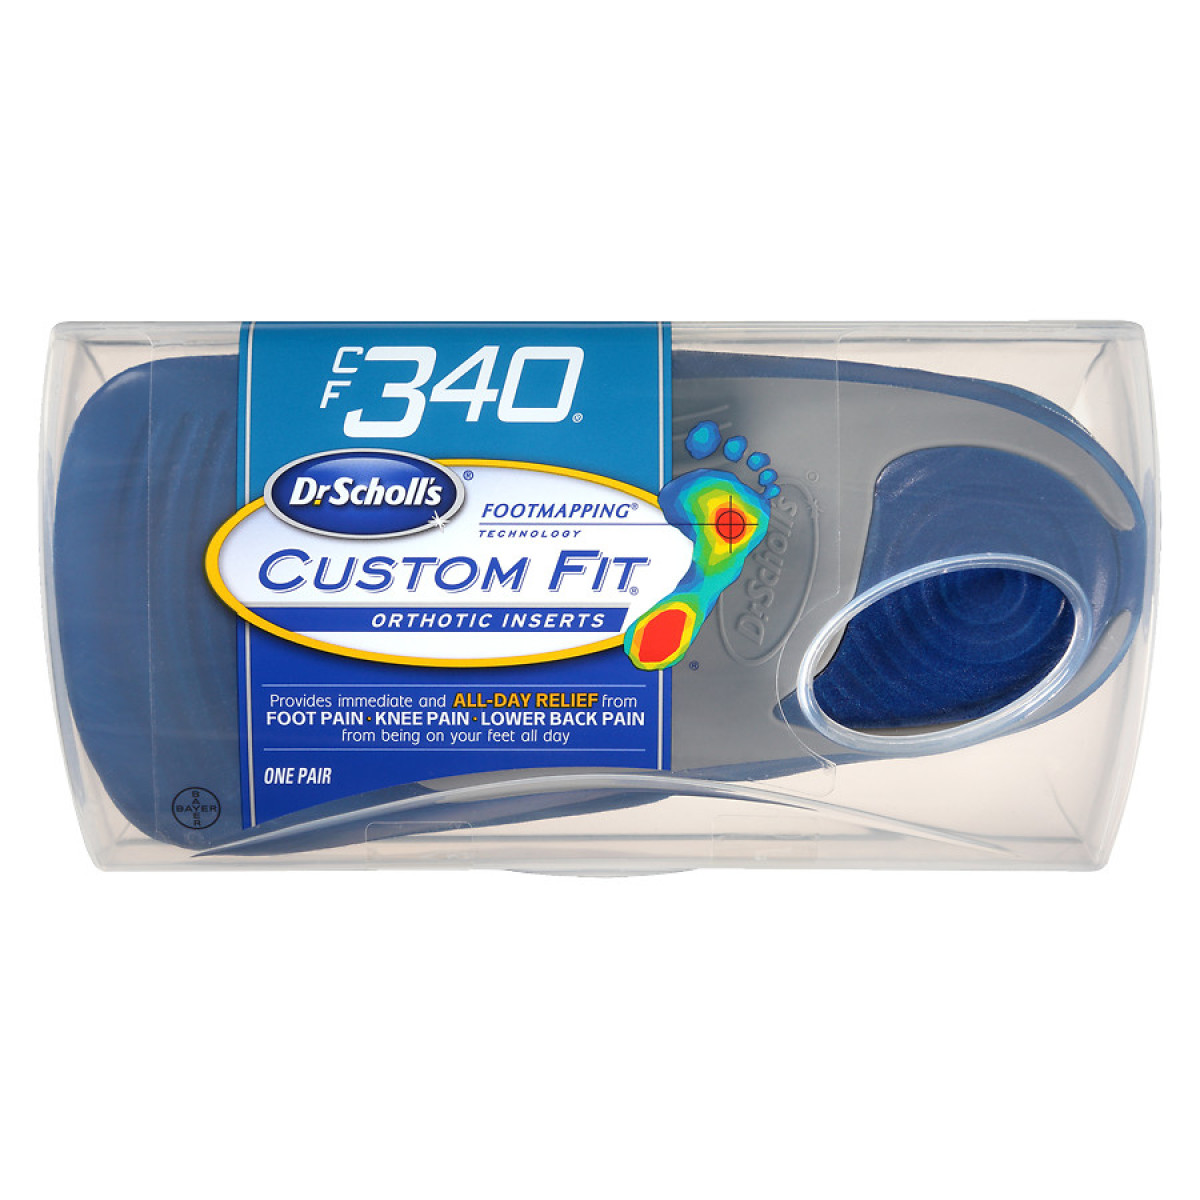 Scholl's Custom Fit Orthotic Inserts Dr 